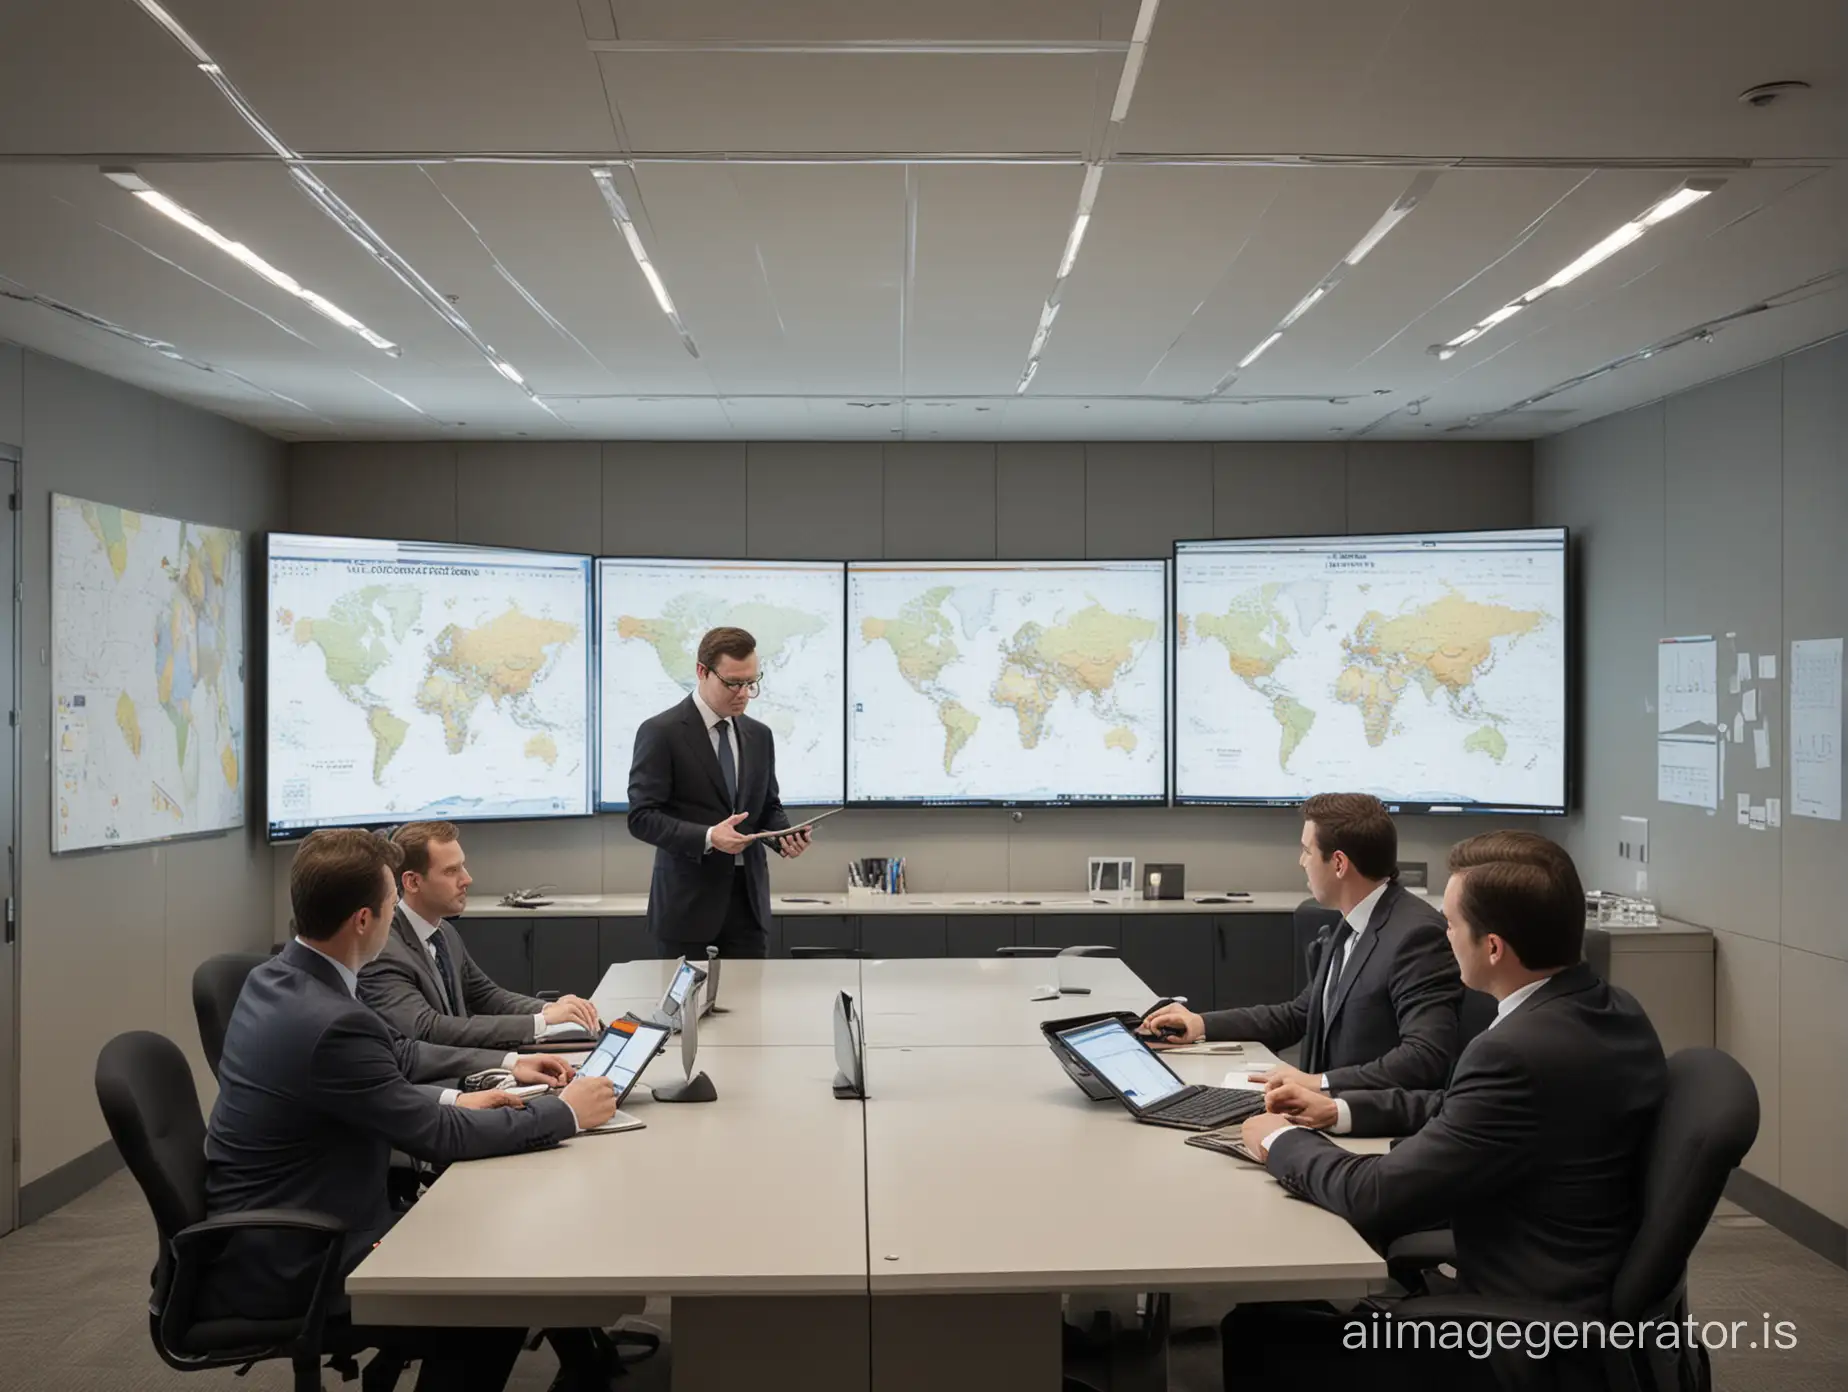  hall, flat panel monitors hanging on the walls, maps and graphs on them. There is a large table in the center of the room. Behind him sit three men in suits, with tablets in their hands.